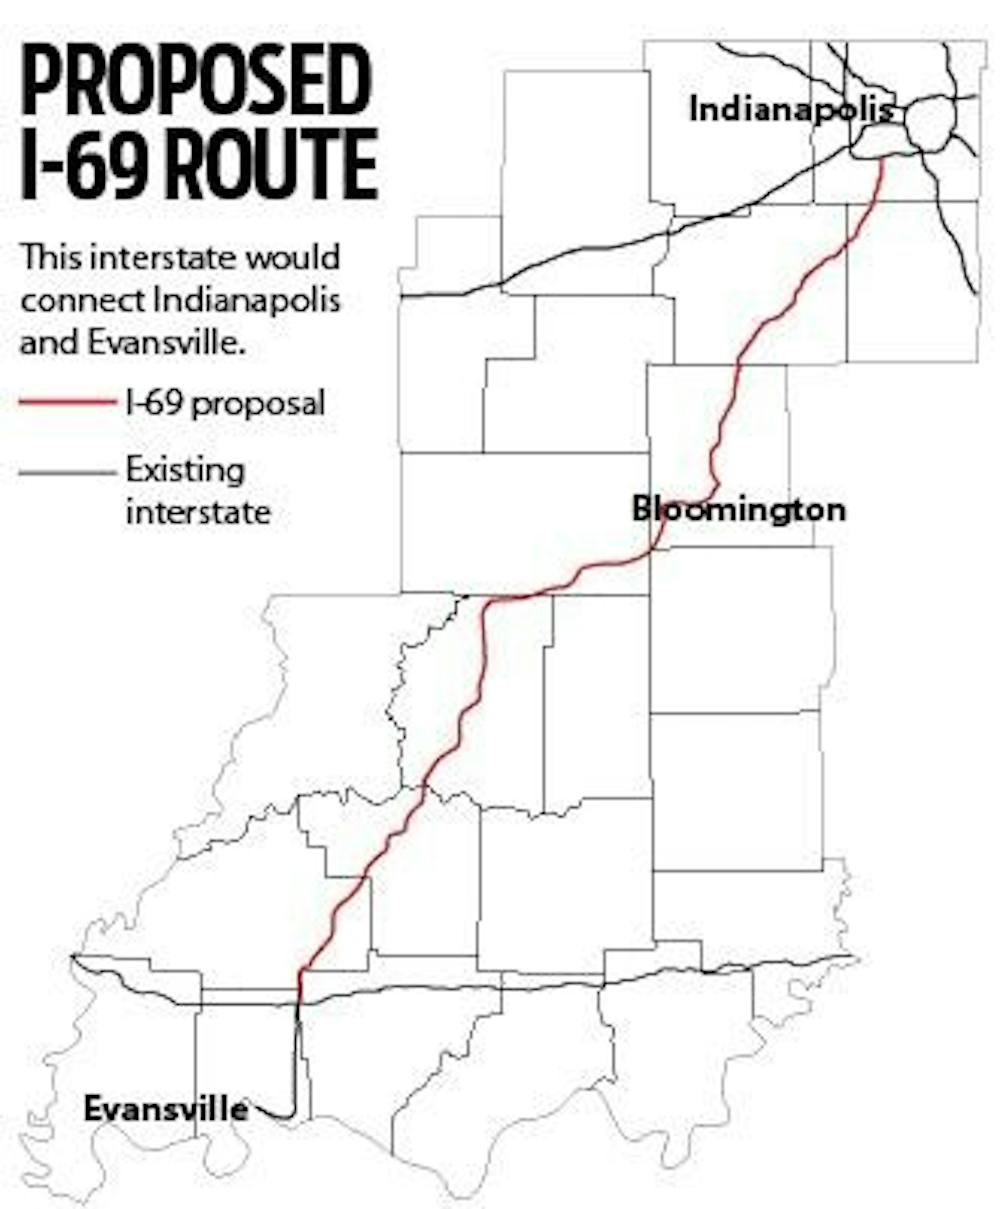 Proposed I-69 route